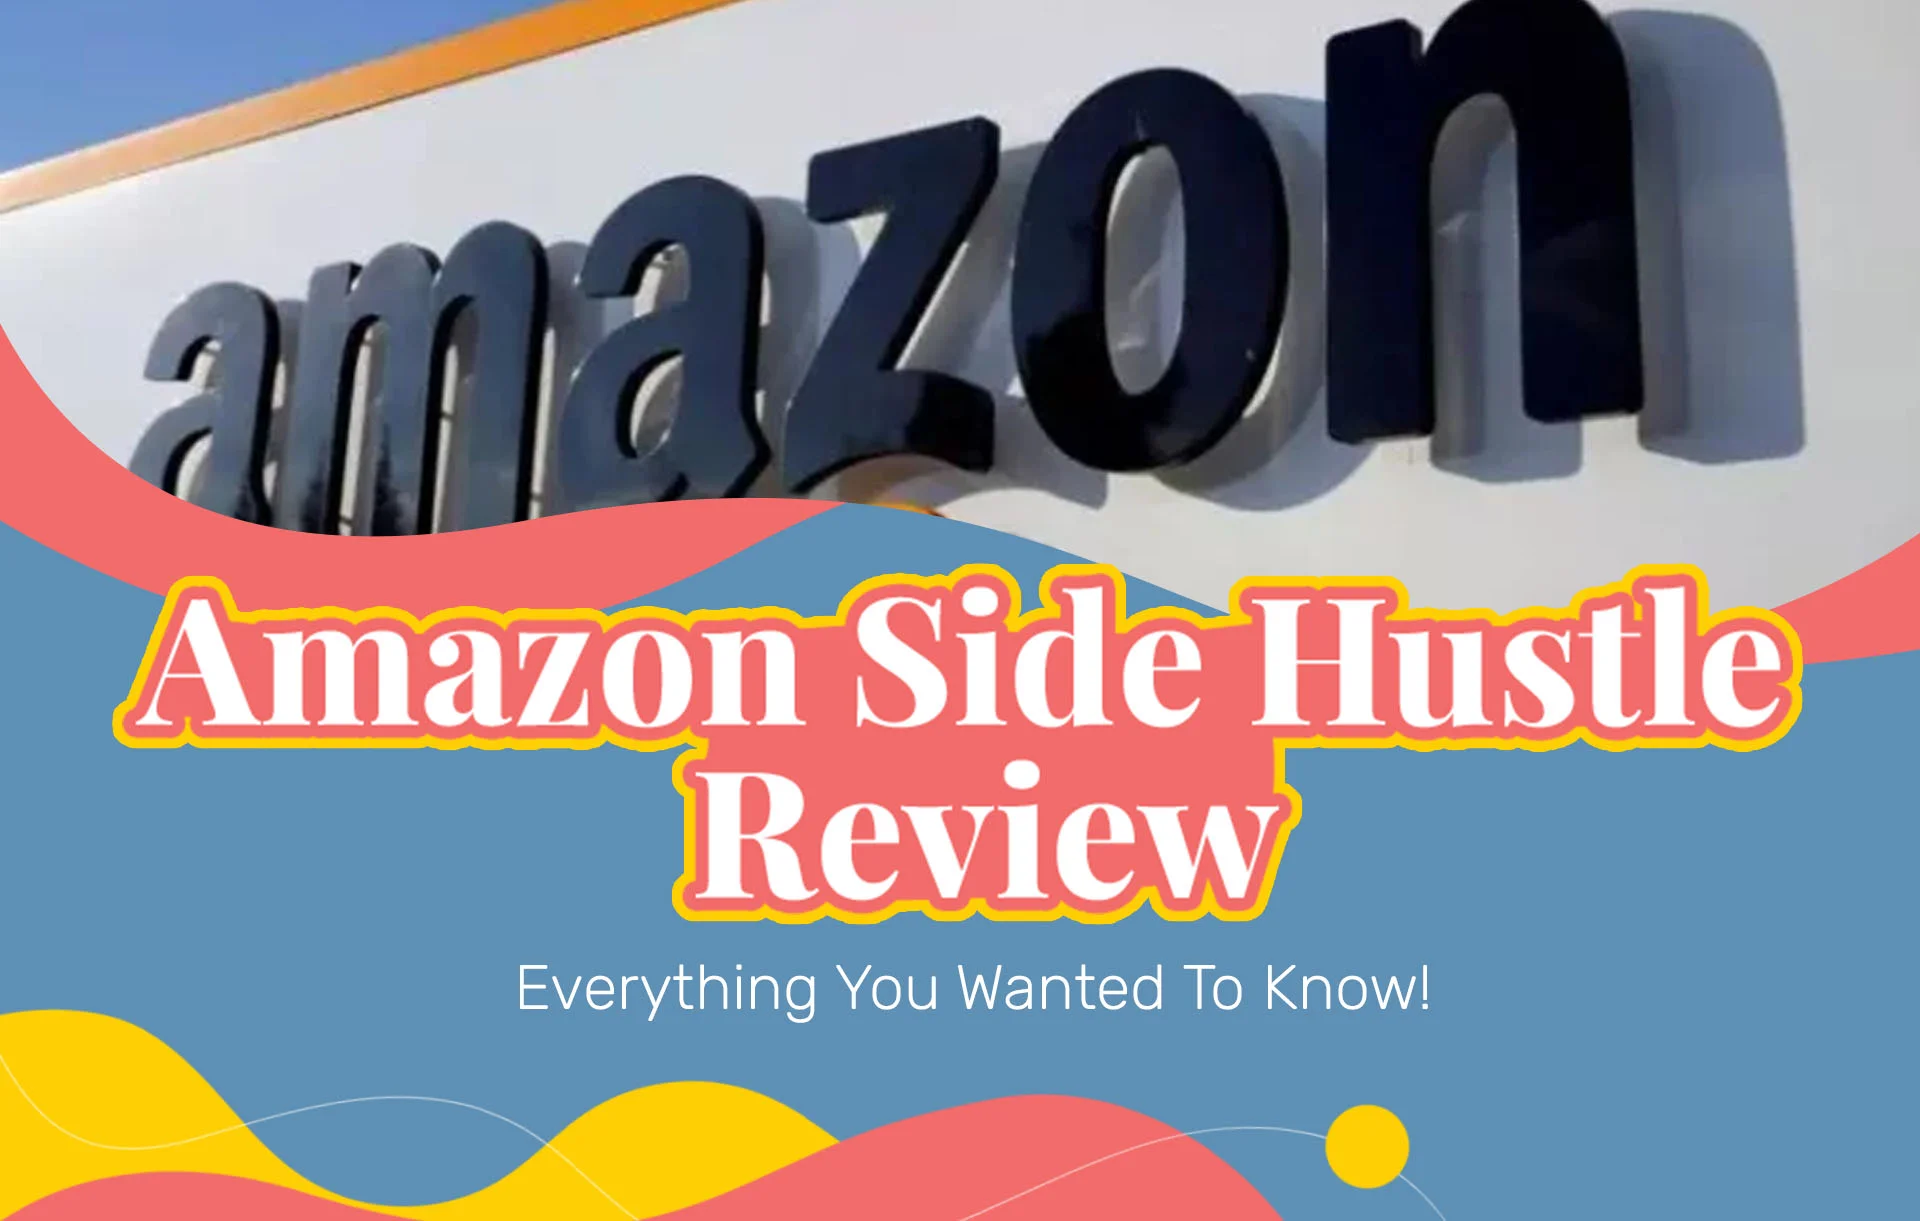 Amazon Side Hustle Reviews: Everything You Wanted To Know!